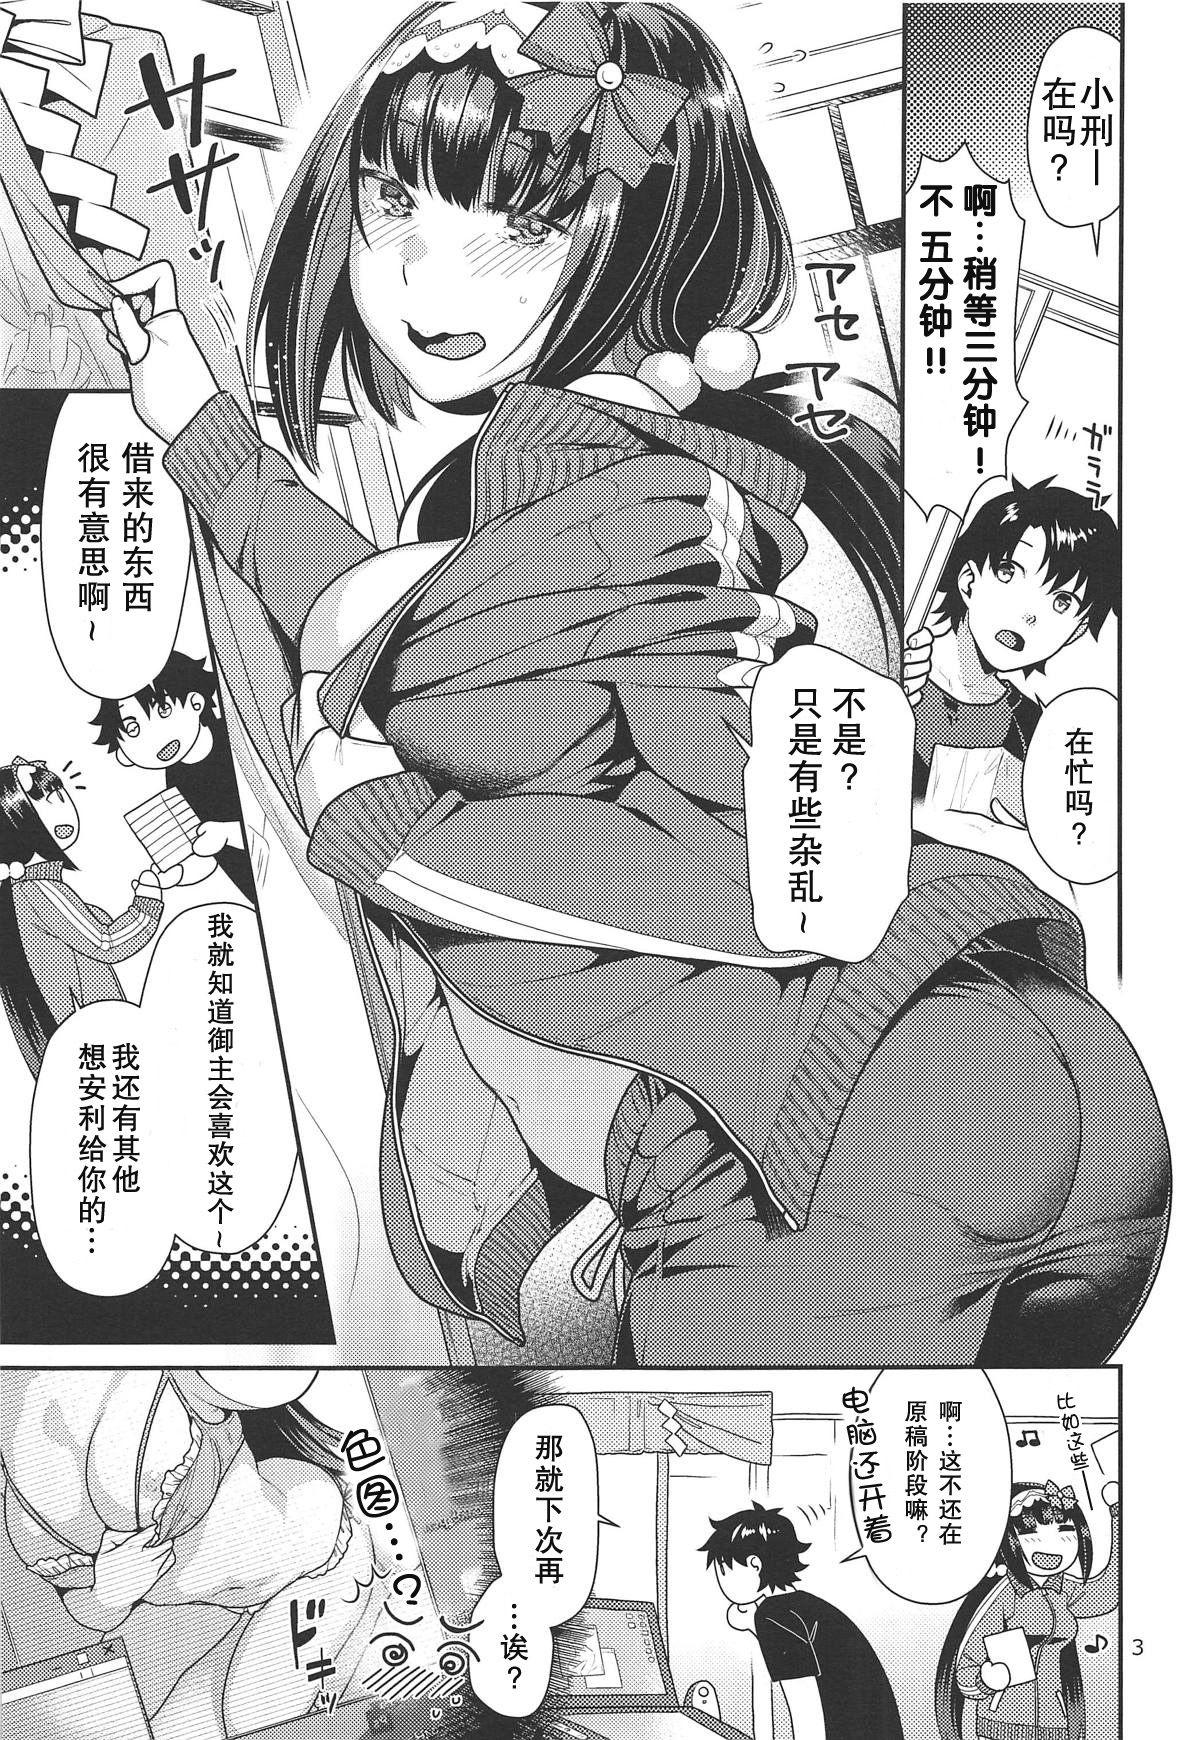 Twink Hime to Jersey to Ero Shitagi - Fate grand order Mofos - Page 3